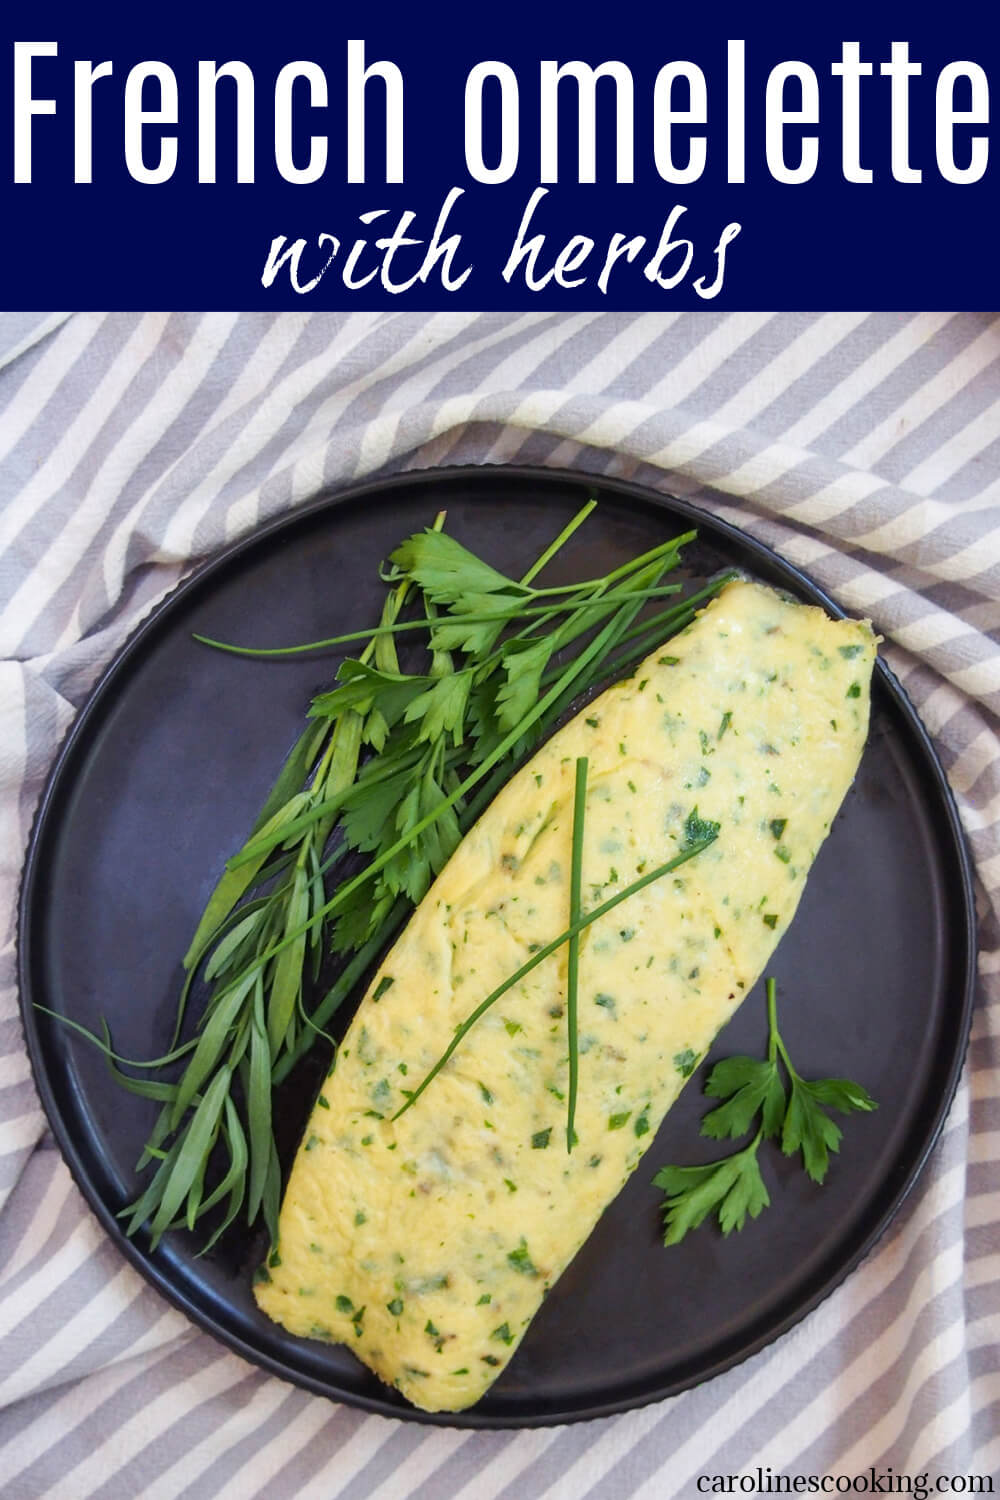 A traditional French omelette (omelet) is light, simple and oh so tasty.  This version with a delicate herb filling makes a delicious and easy breakfast (though it's great any time of day).